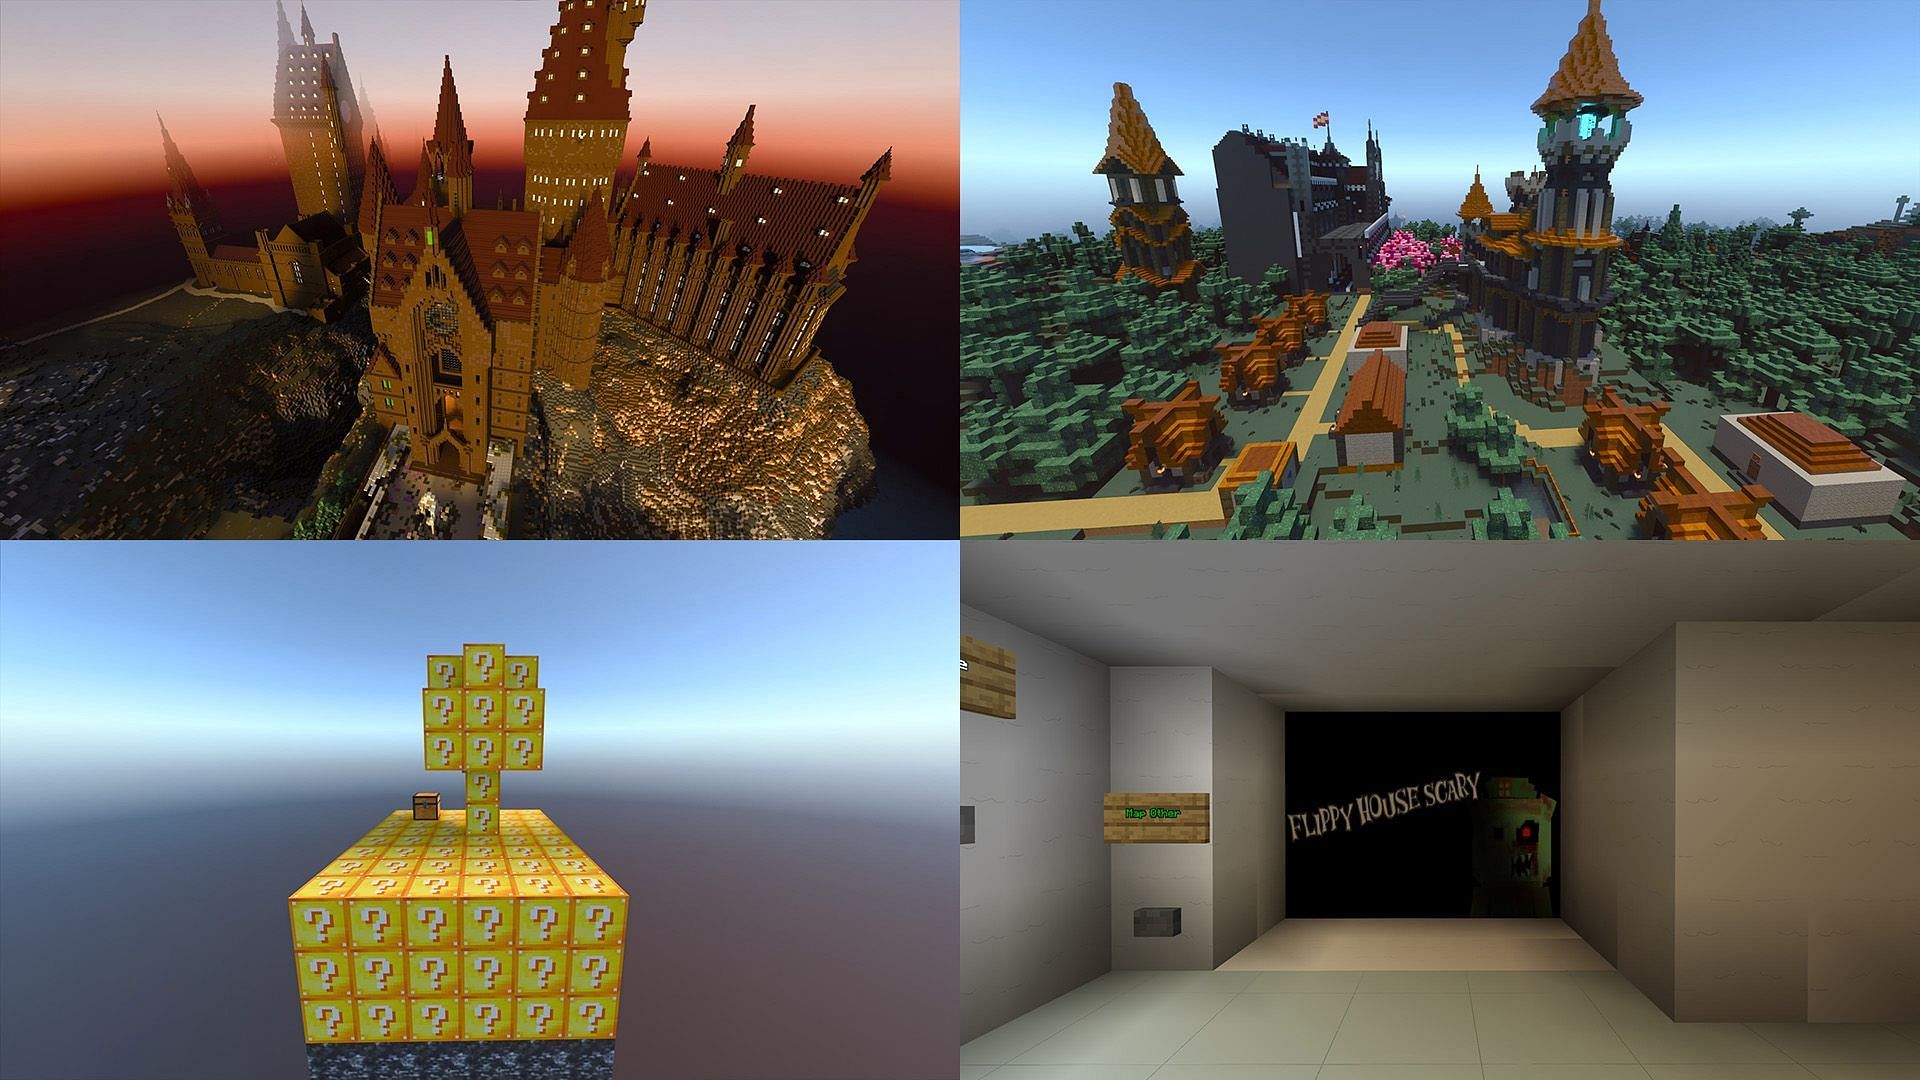 Course through an adventure like never before in Minecraft (Image via Mojang) 